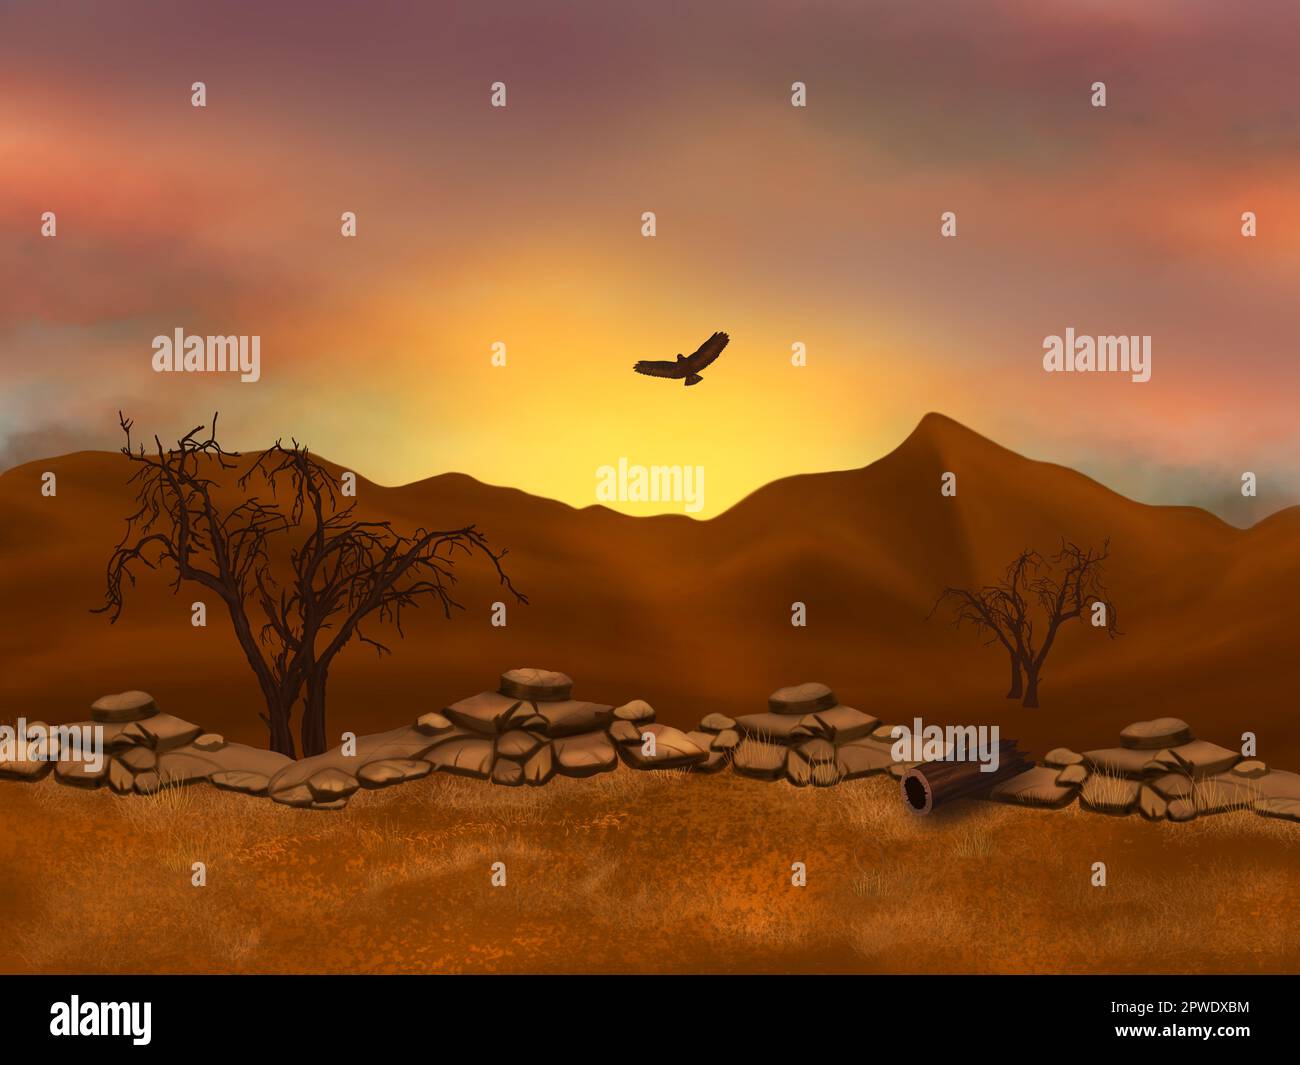 Red desert illustration. Dry trees, an eagle soaring in the sky, red mountains and piles of stones. Stock Photo